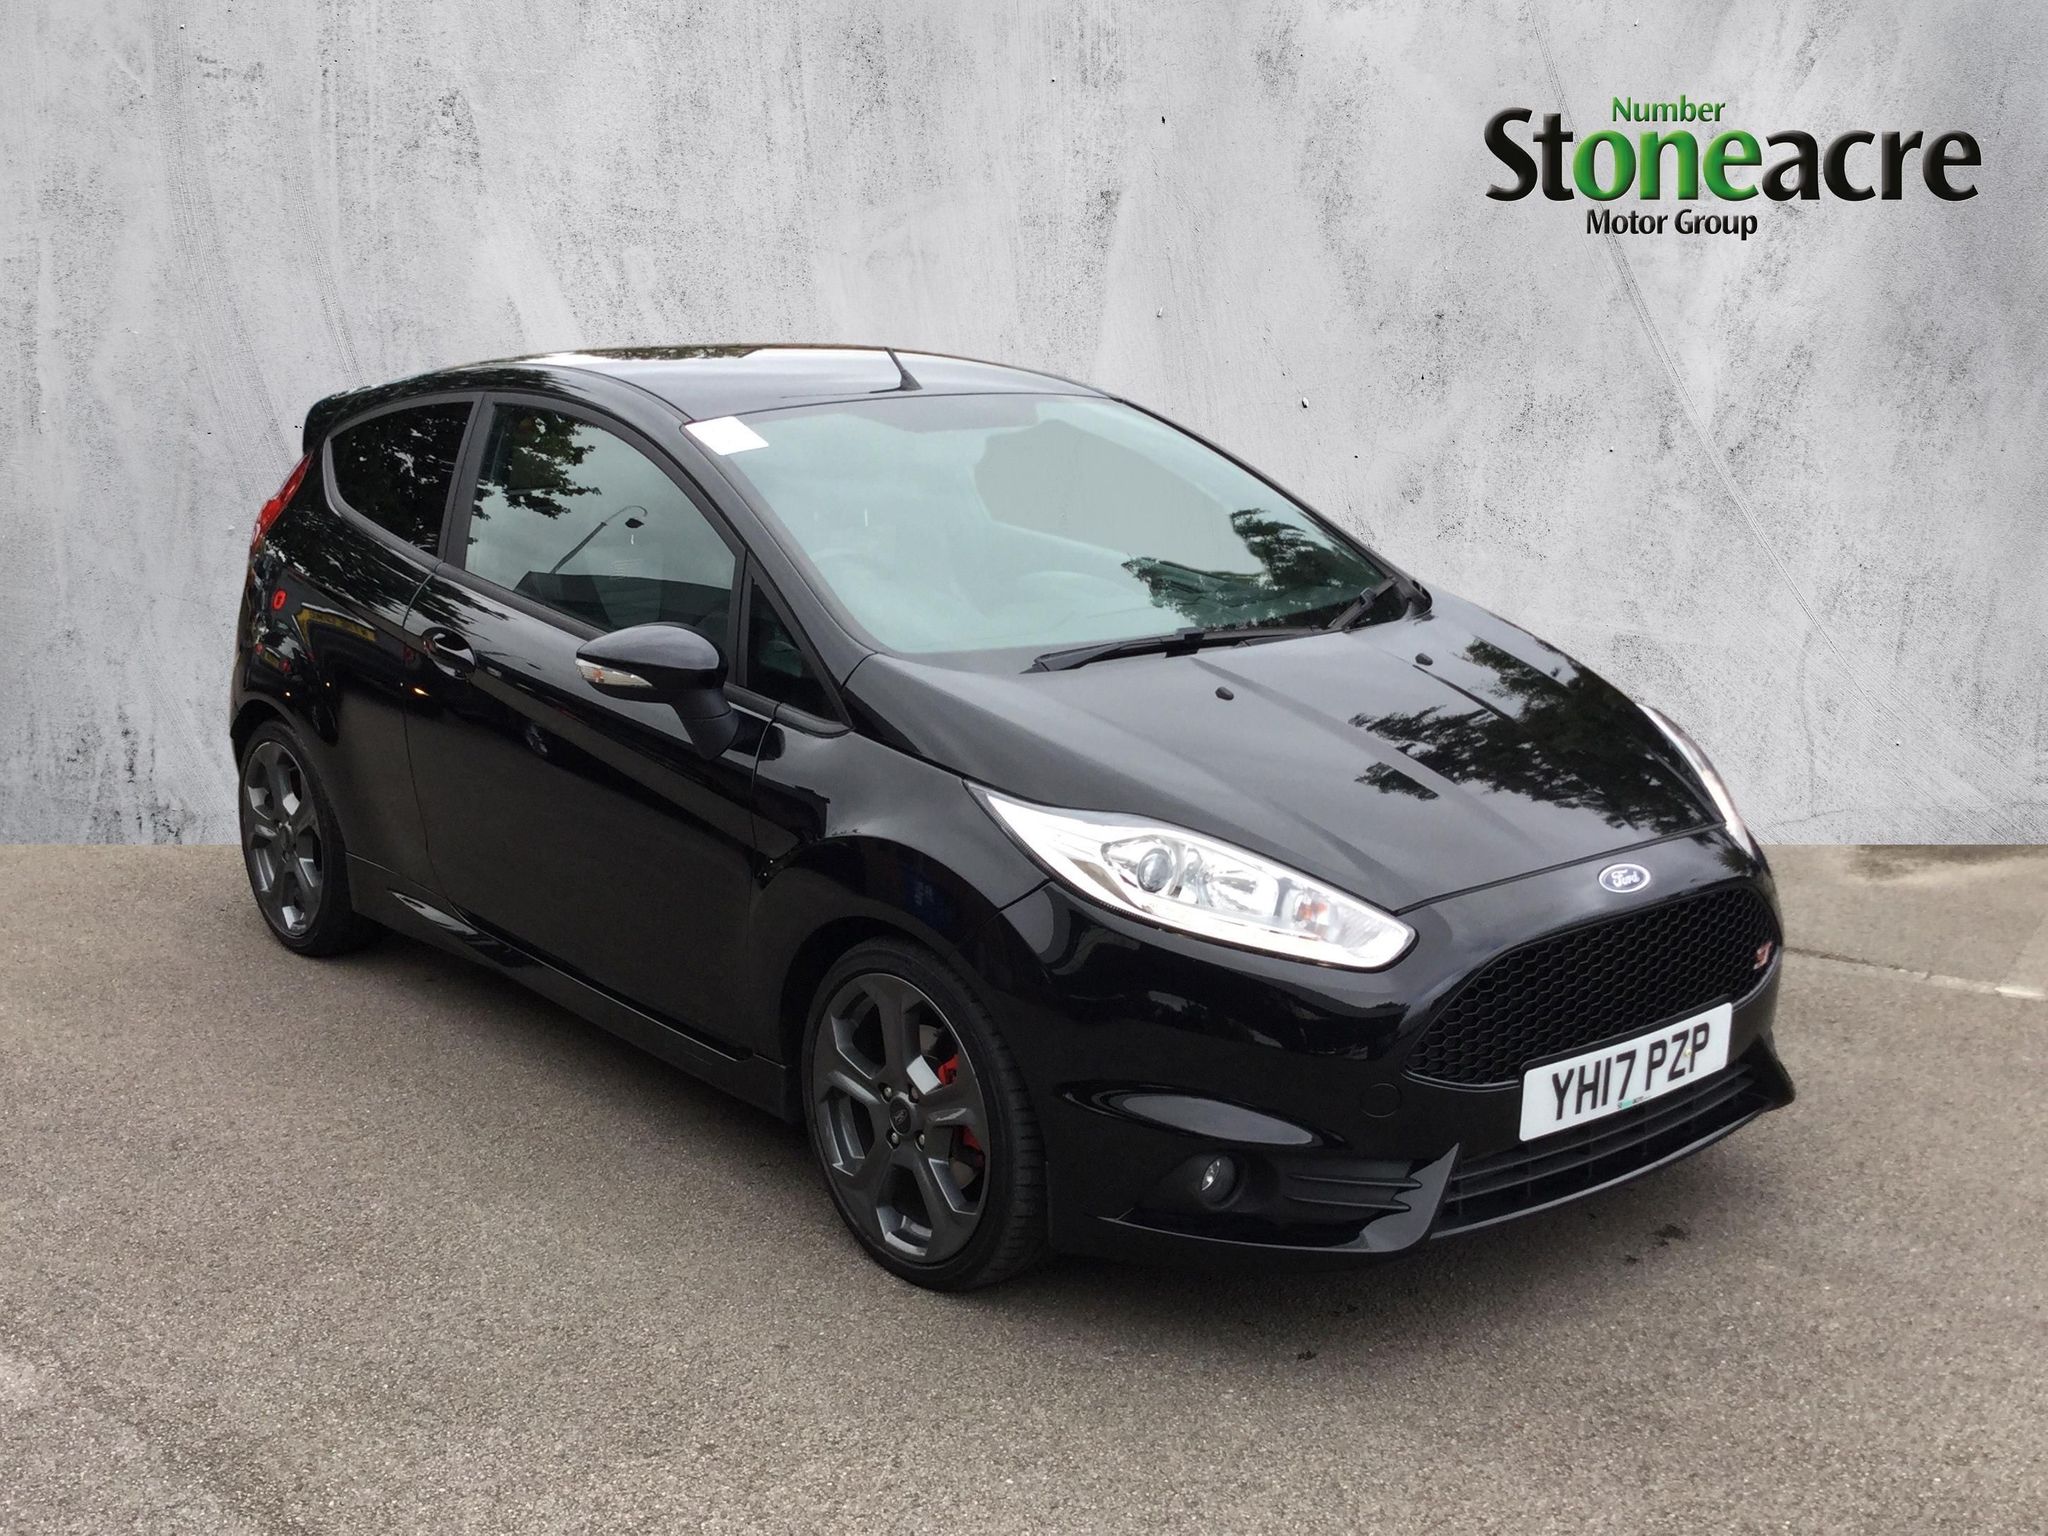 Used Ford Fiesta 1 6 Ecoboost St 2 3dr Yh17pzp Stoneacre